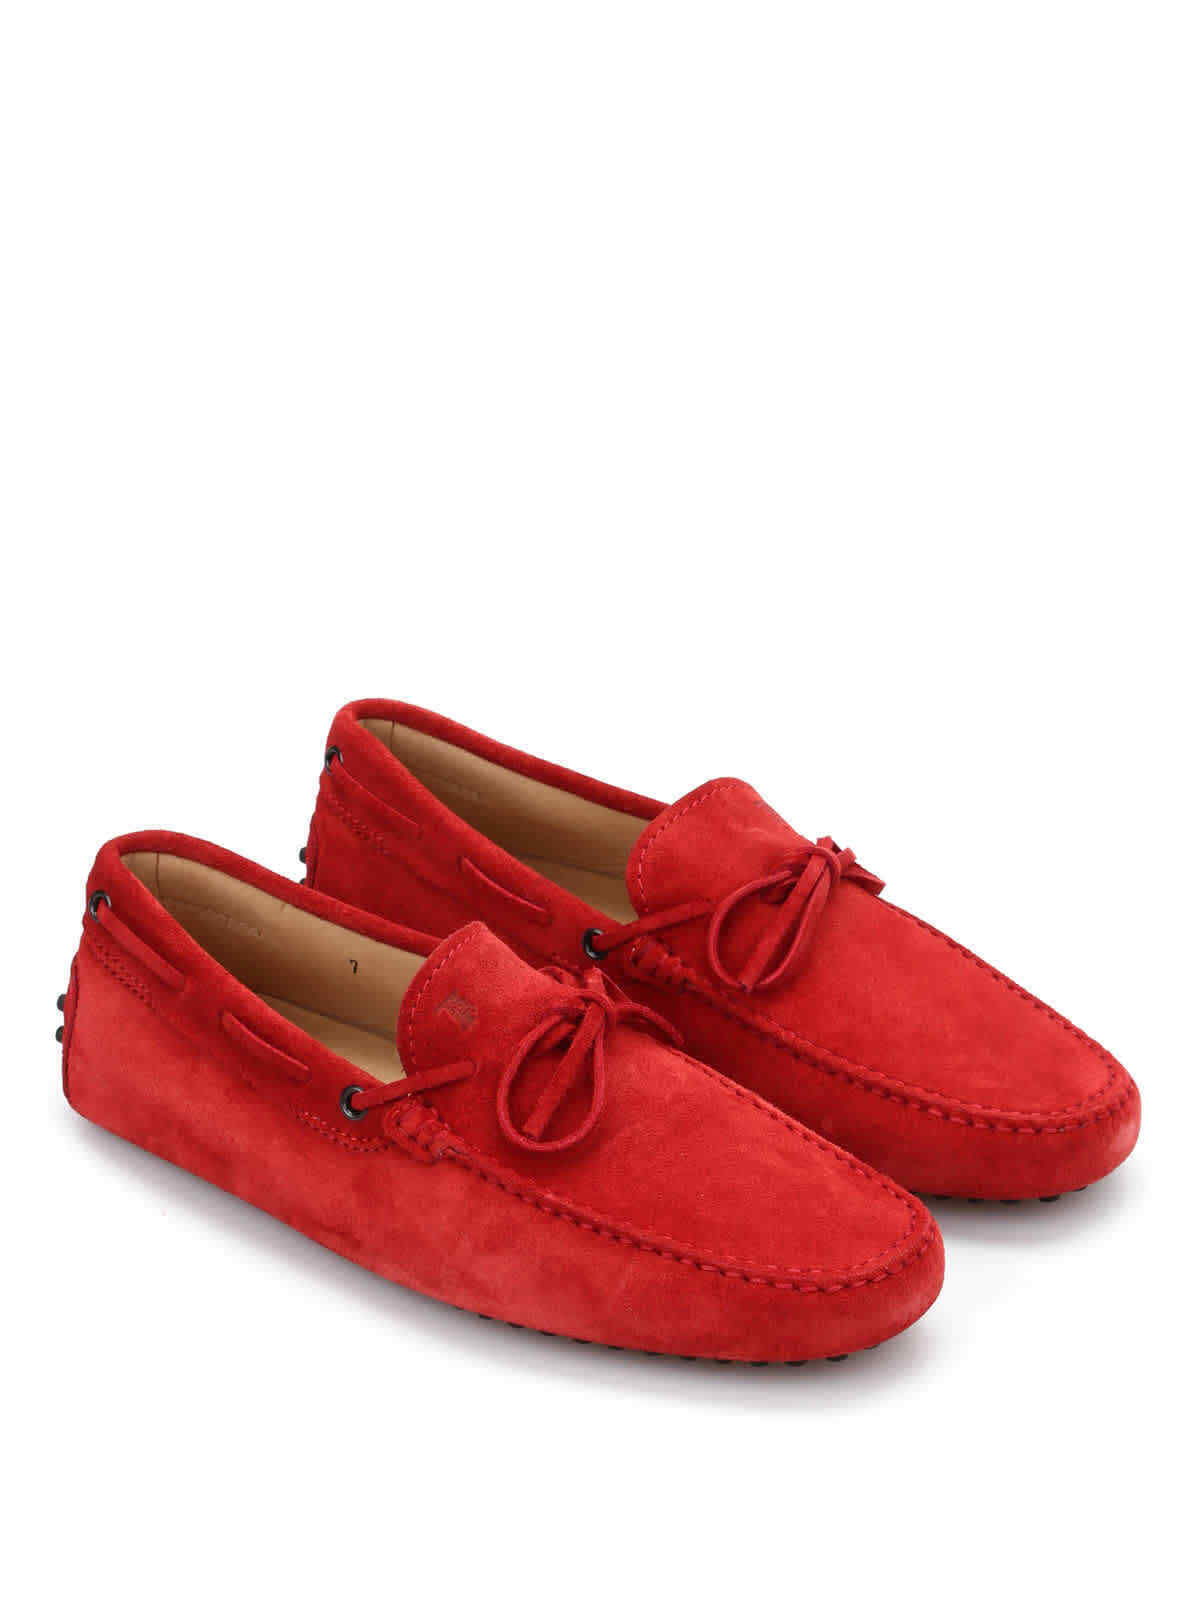 TOD'SMen's Leather Moccasins RED SUEDE MOCCASIN DRIVERS SHOES | eBay